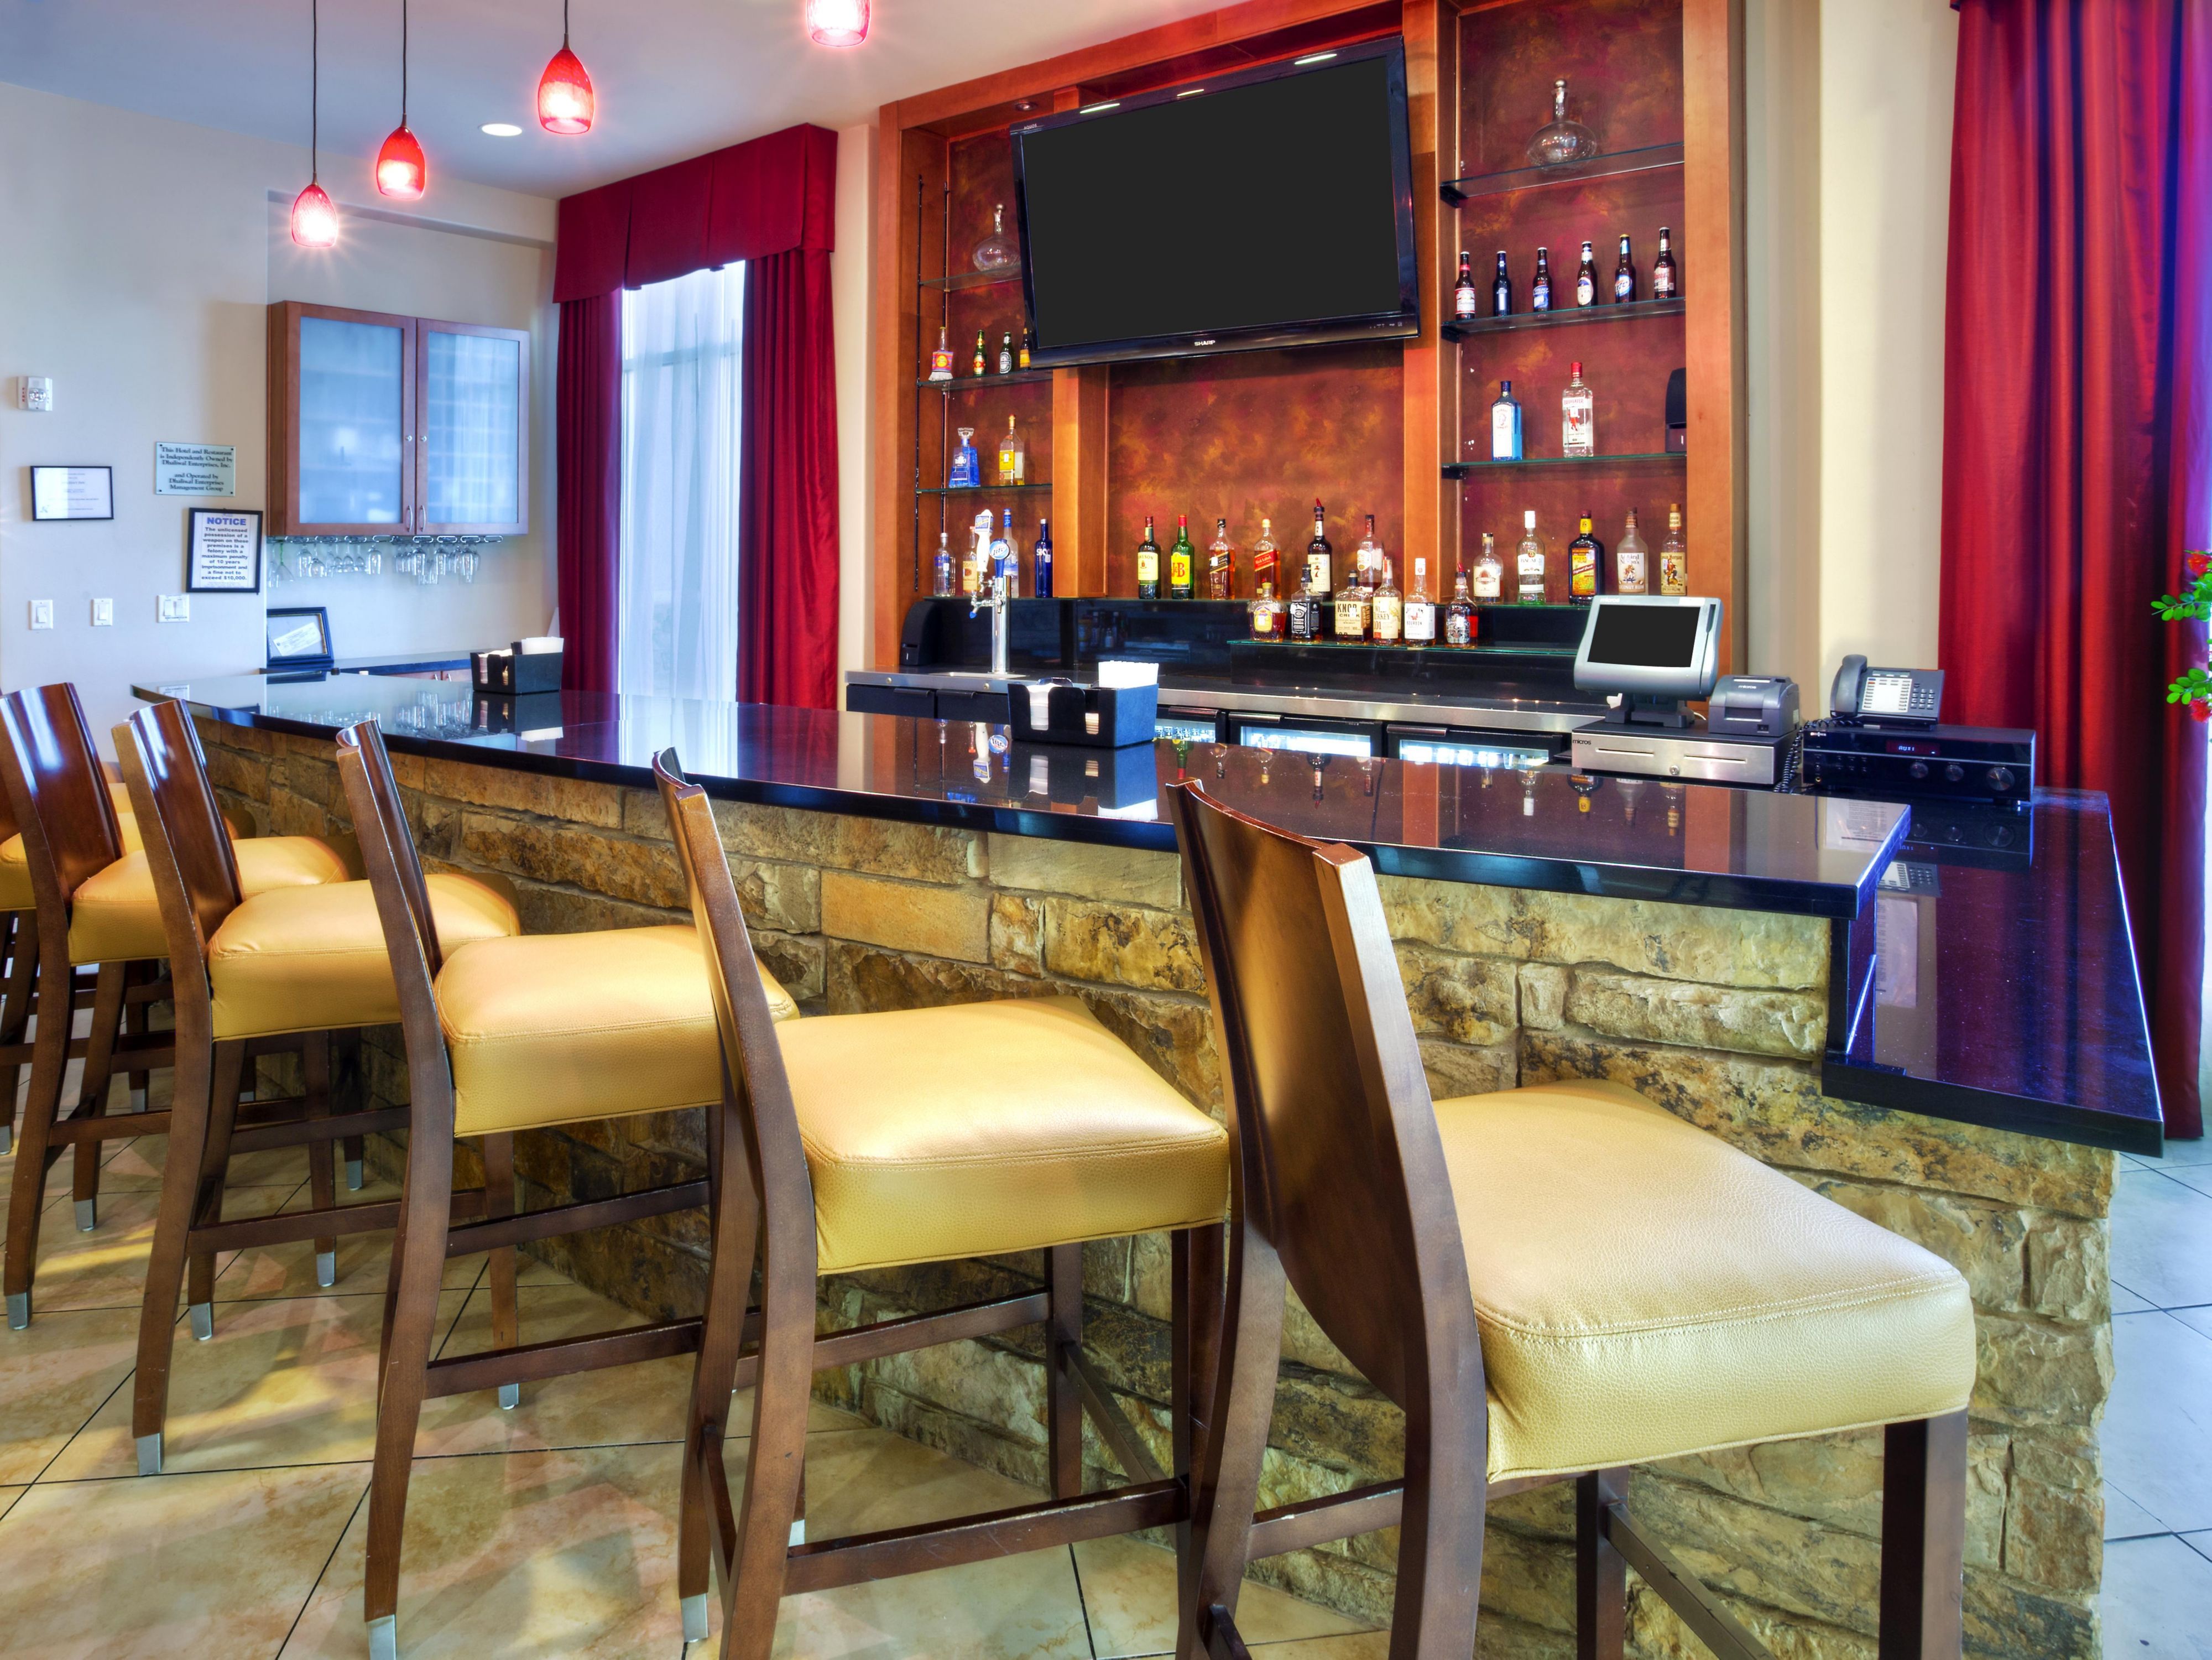 Delicious Central Texas cuisine is only footsteps from your room at Holiday Inn Killeen. Stop by Harv's Sports Bar & Grill for an inspired menu of classic American fare and sizzling Southwest specialties. Catch the big game on six flat-screen televisions, placed throughout our cozy bar and lounge area, so you always have a great view.